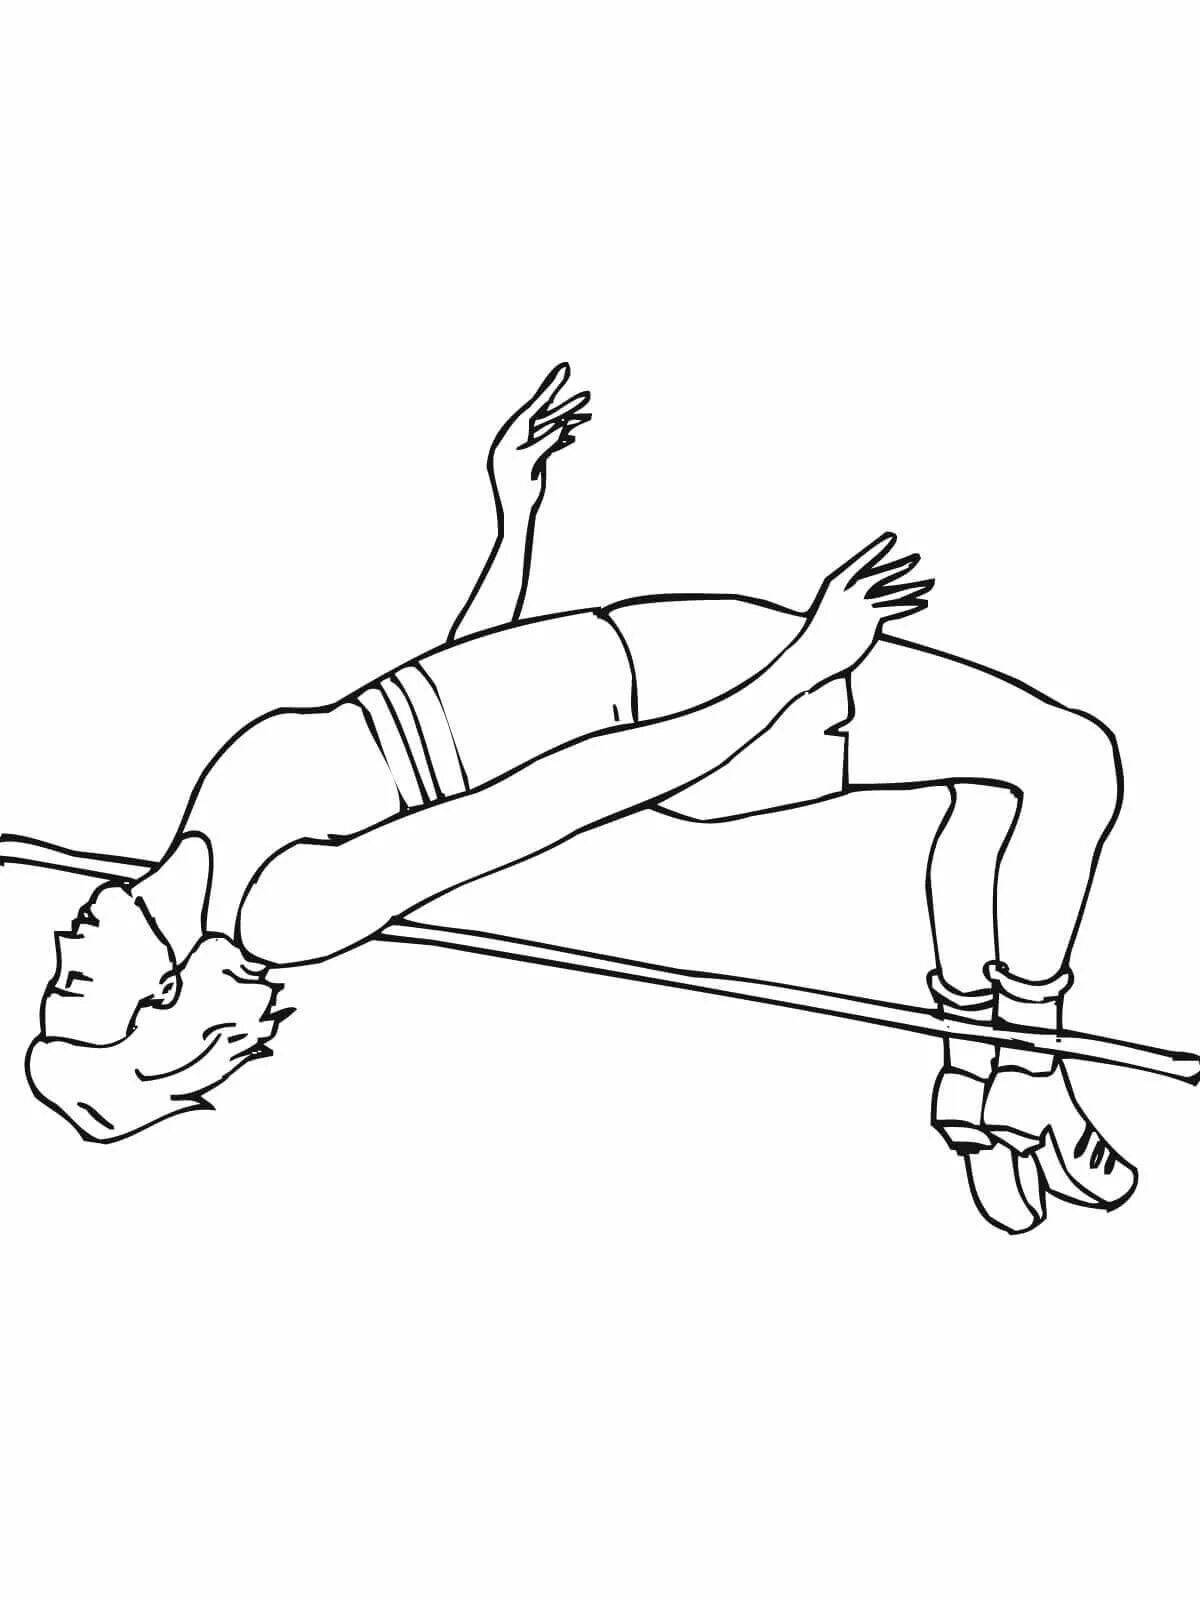 Athletics playful coloring page